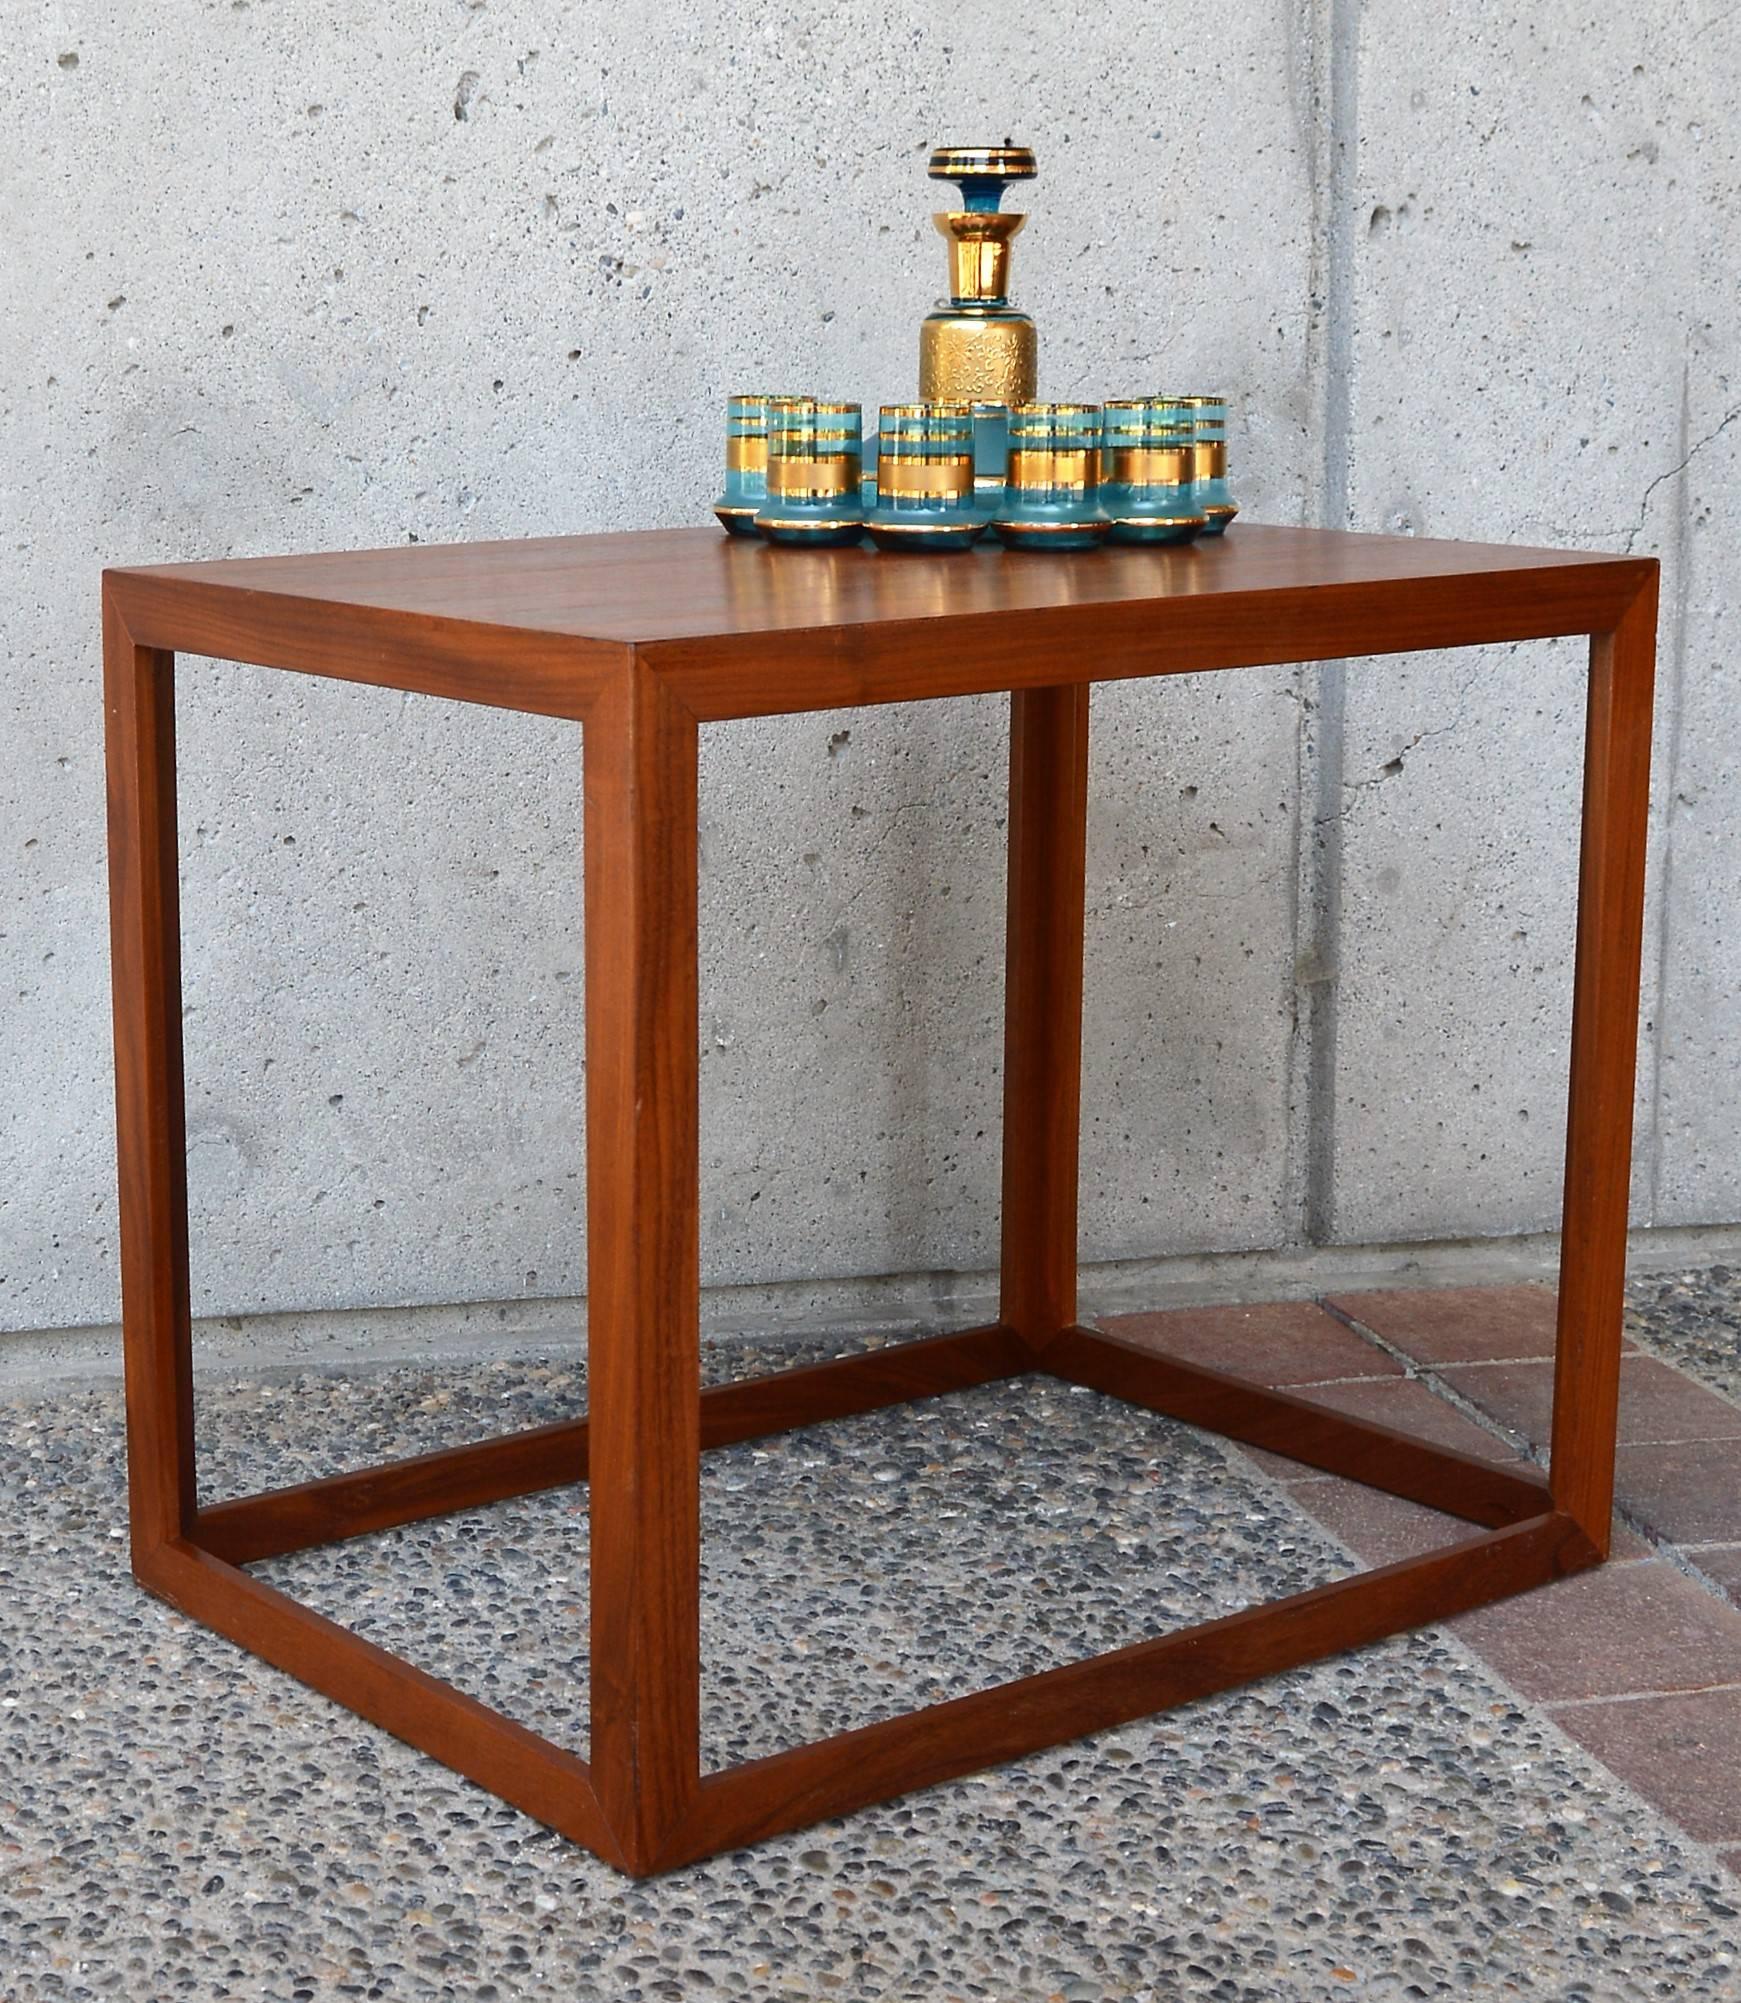 Mid-Century Modern Danish Modern Teak and Mahogany Cube Side Table or Small Coffee Table